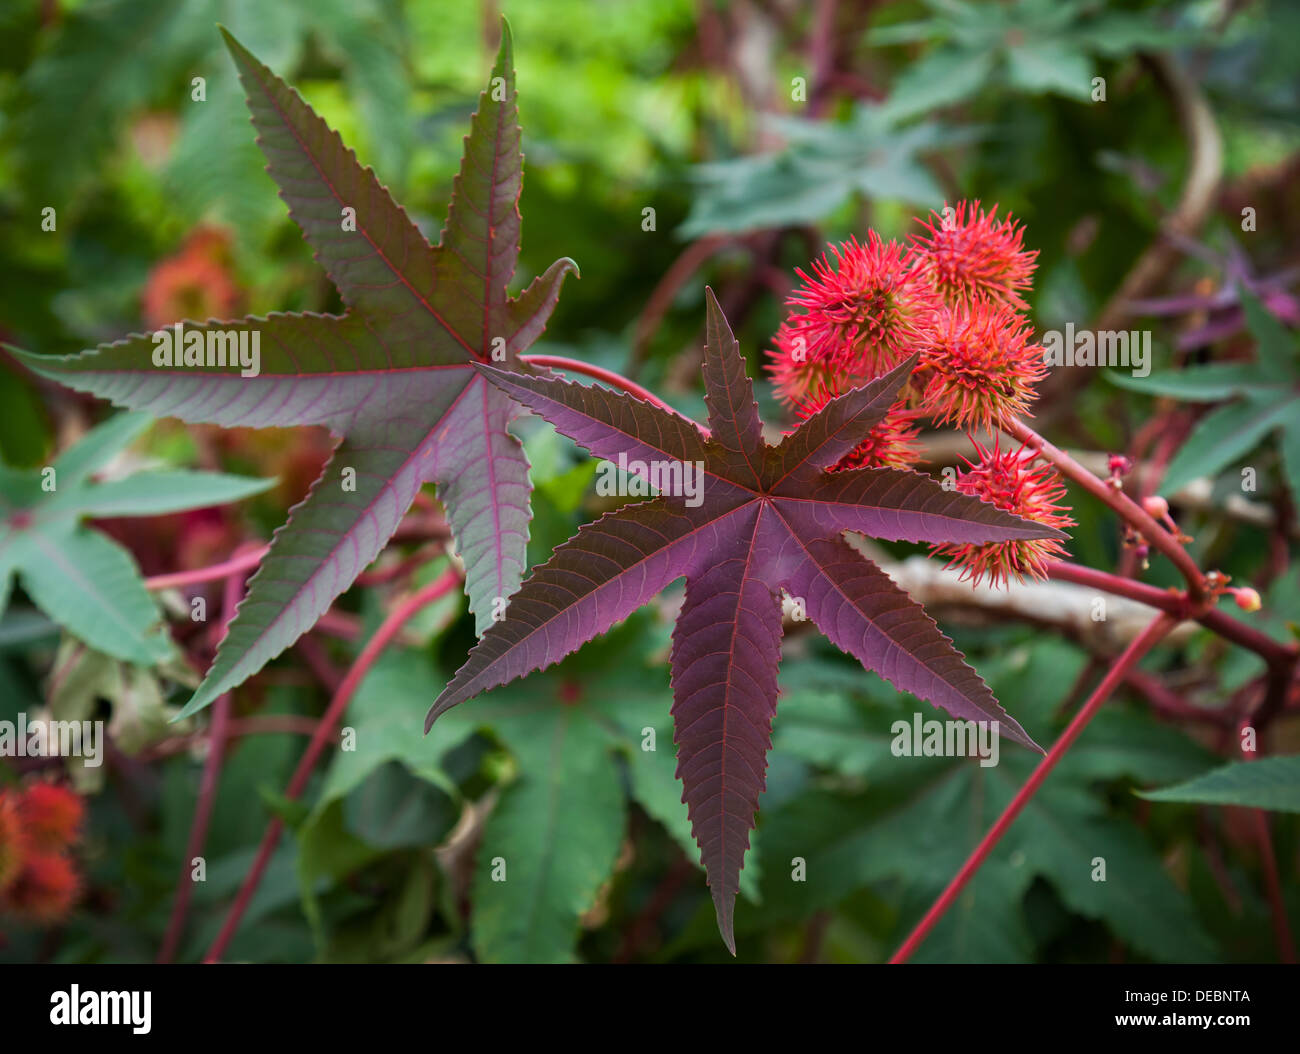 Castor oil plant with red prickly fruits and colorful leaves Stock Photo